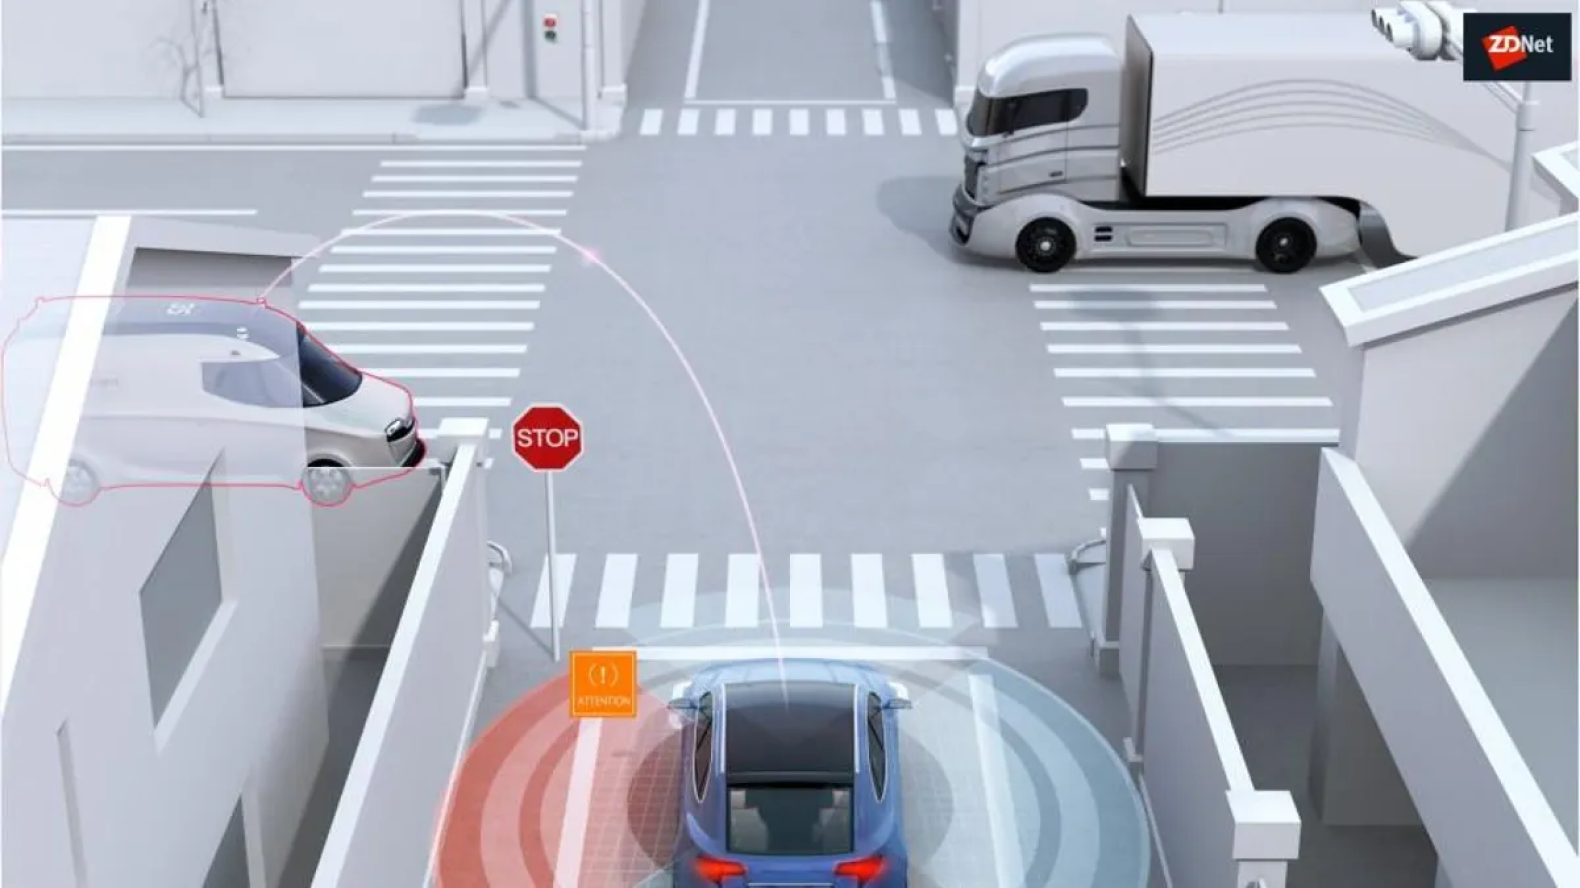 Conceptual representation of traffic monitoring using image recognition technology on the roads.